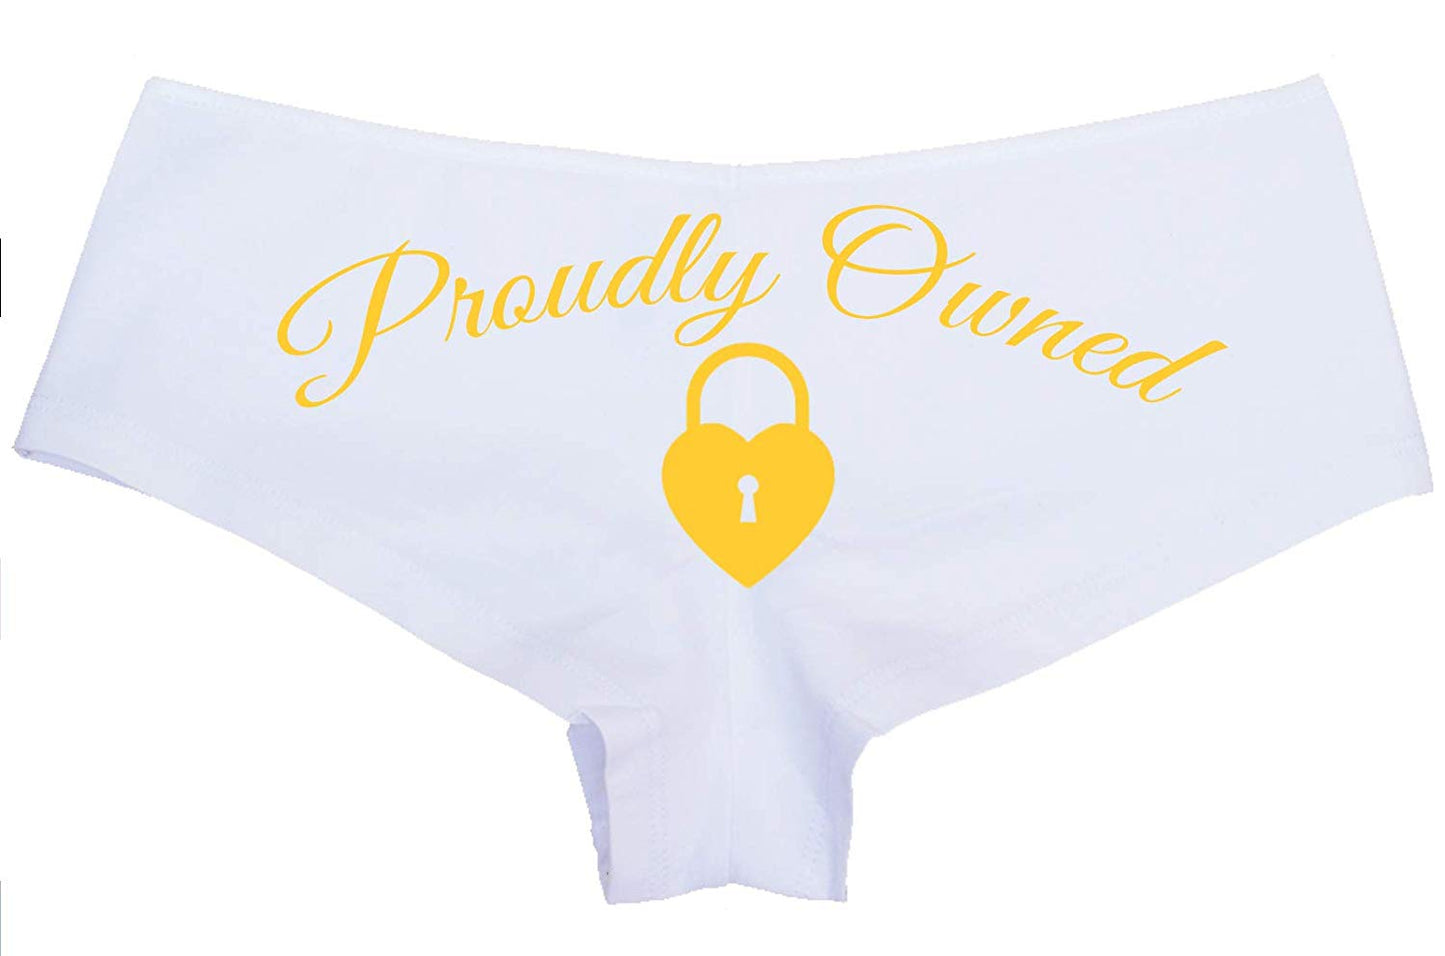 Knaughty Knickers BDSM Proudly Owned White Boyshort for Your Submissive Sub Slut